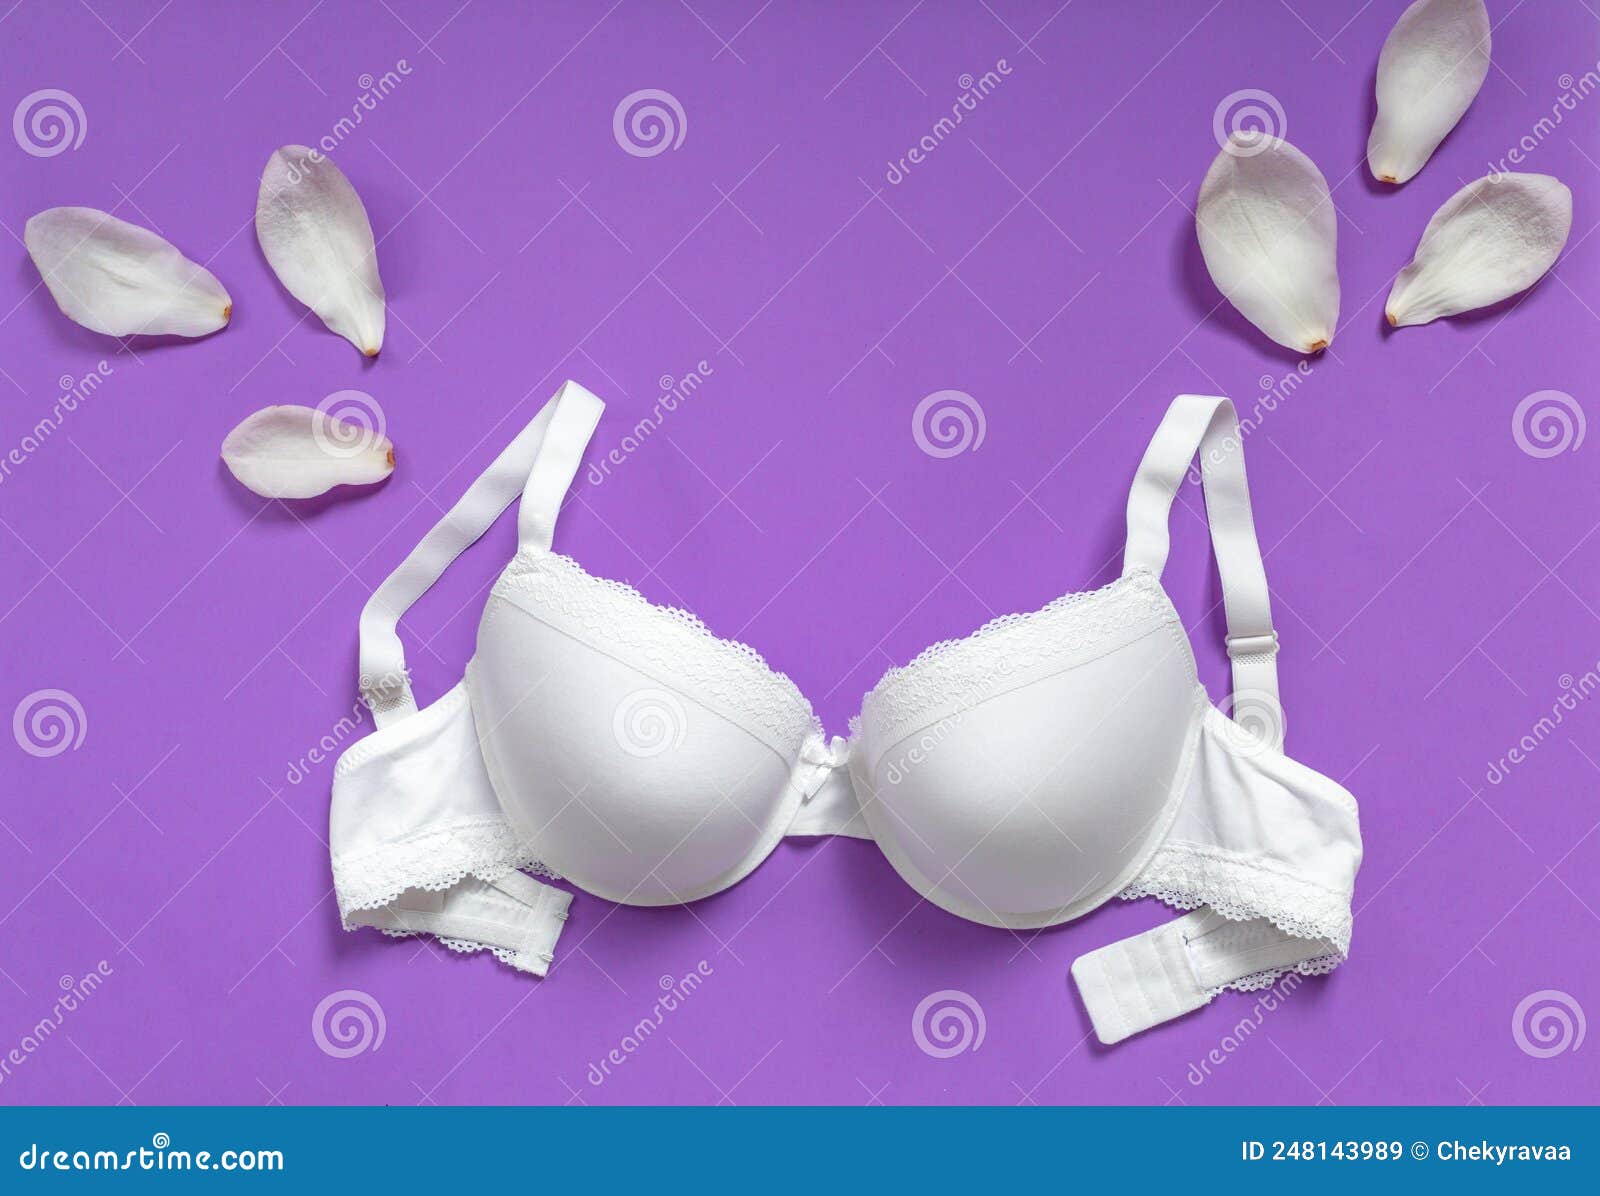 https://thumbs.dreamstime.com/z/white-new-bra-violet-background-lace-lingerie-very-peri-purple-beauty-blog-concept-top-view-flat-lay-248143989.jpg